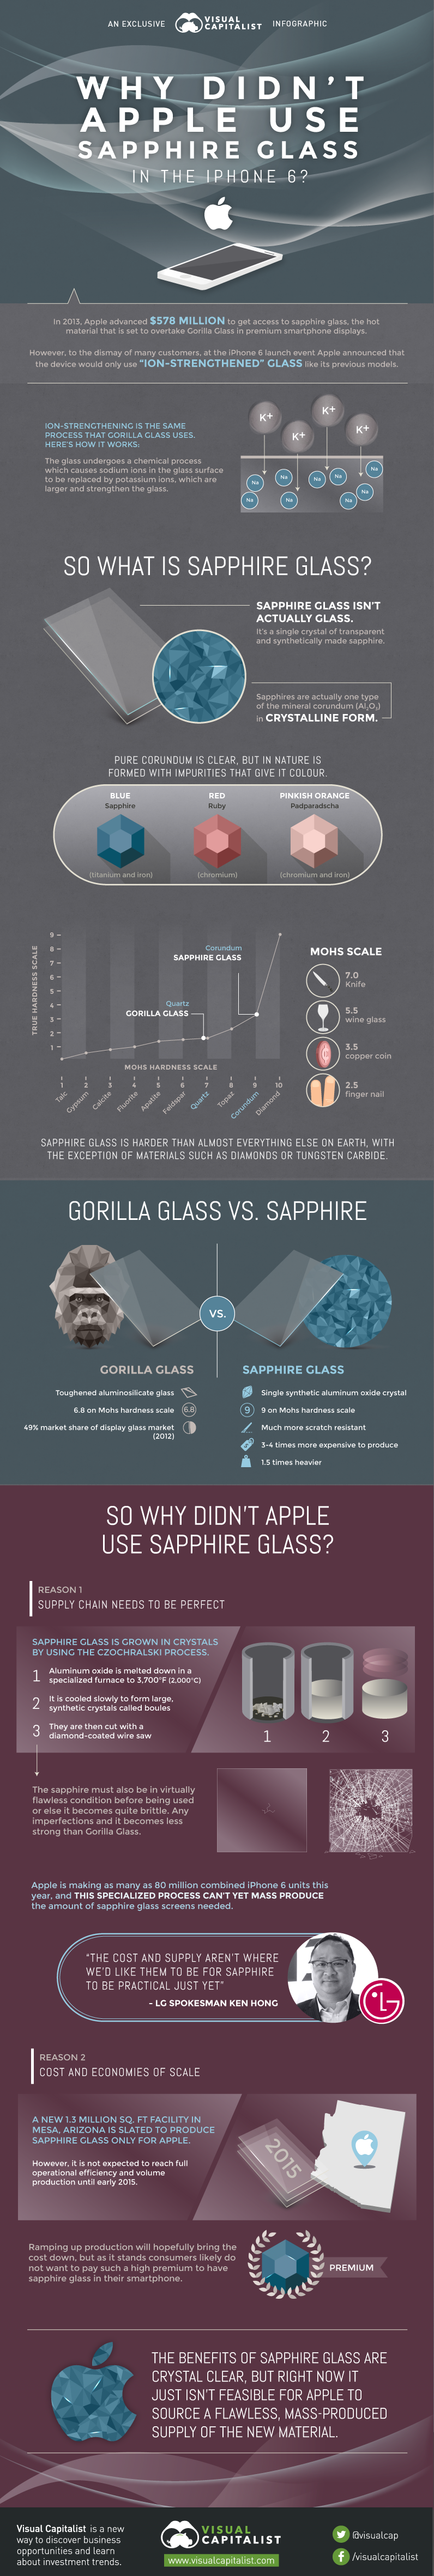 Why Didn’t Apple Use Sapphire Glass in the iPhone 6?